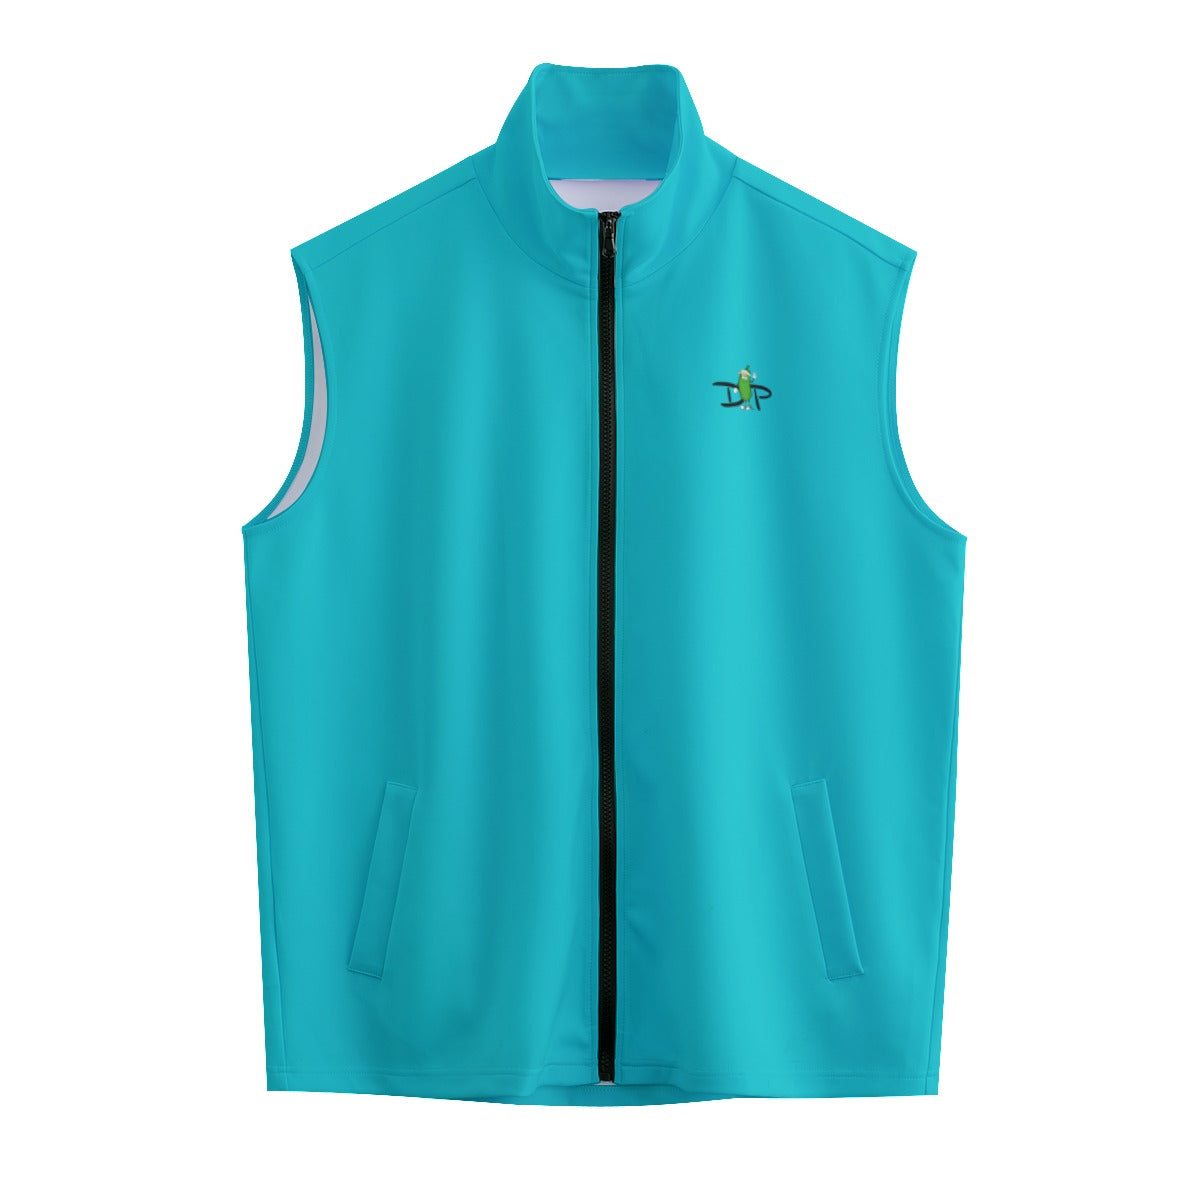 DZY P Classic - Teal - Men's Stand-up Collar Vest by Dizzy Pickle